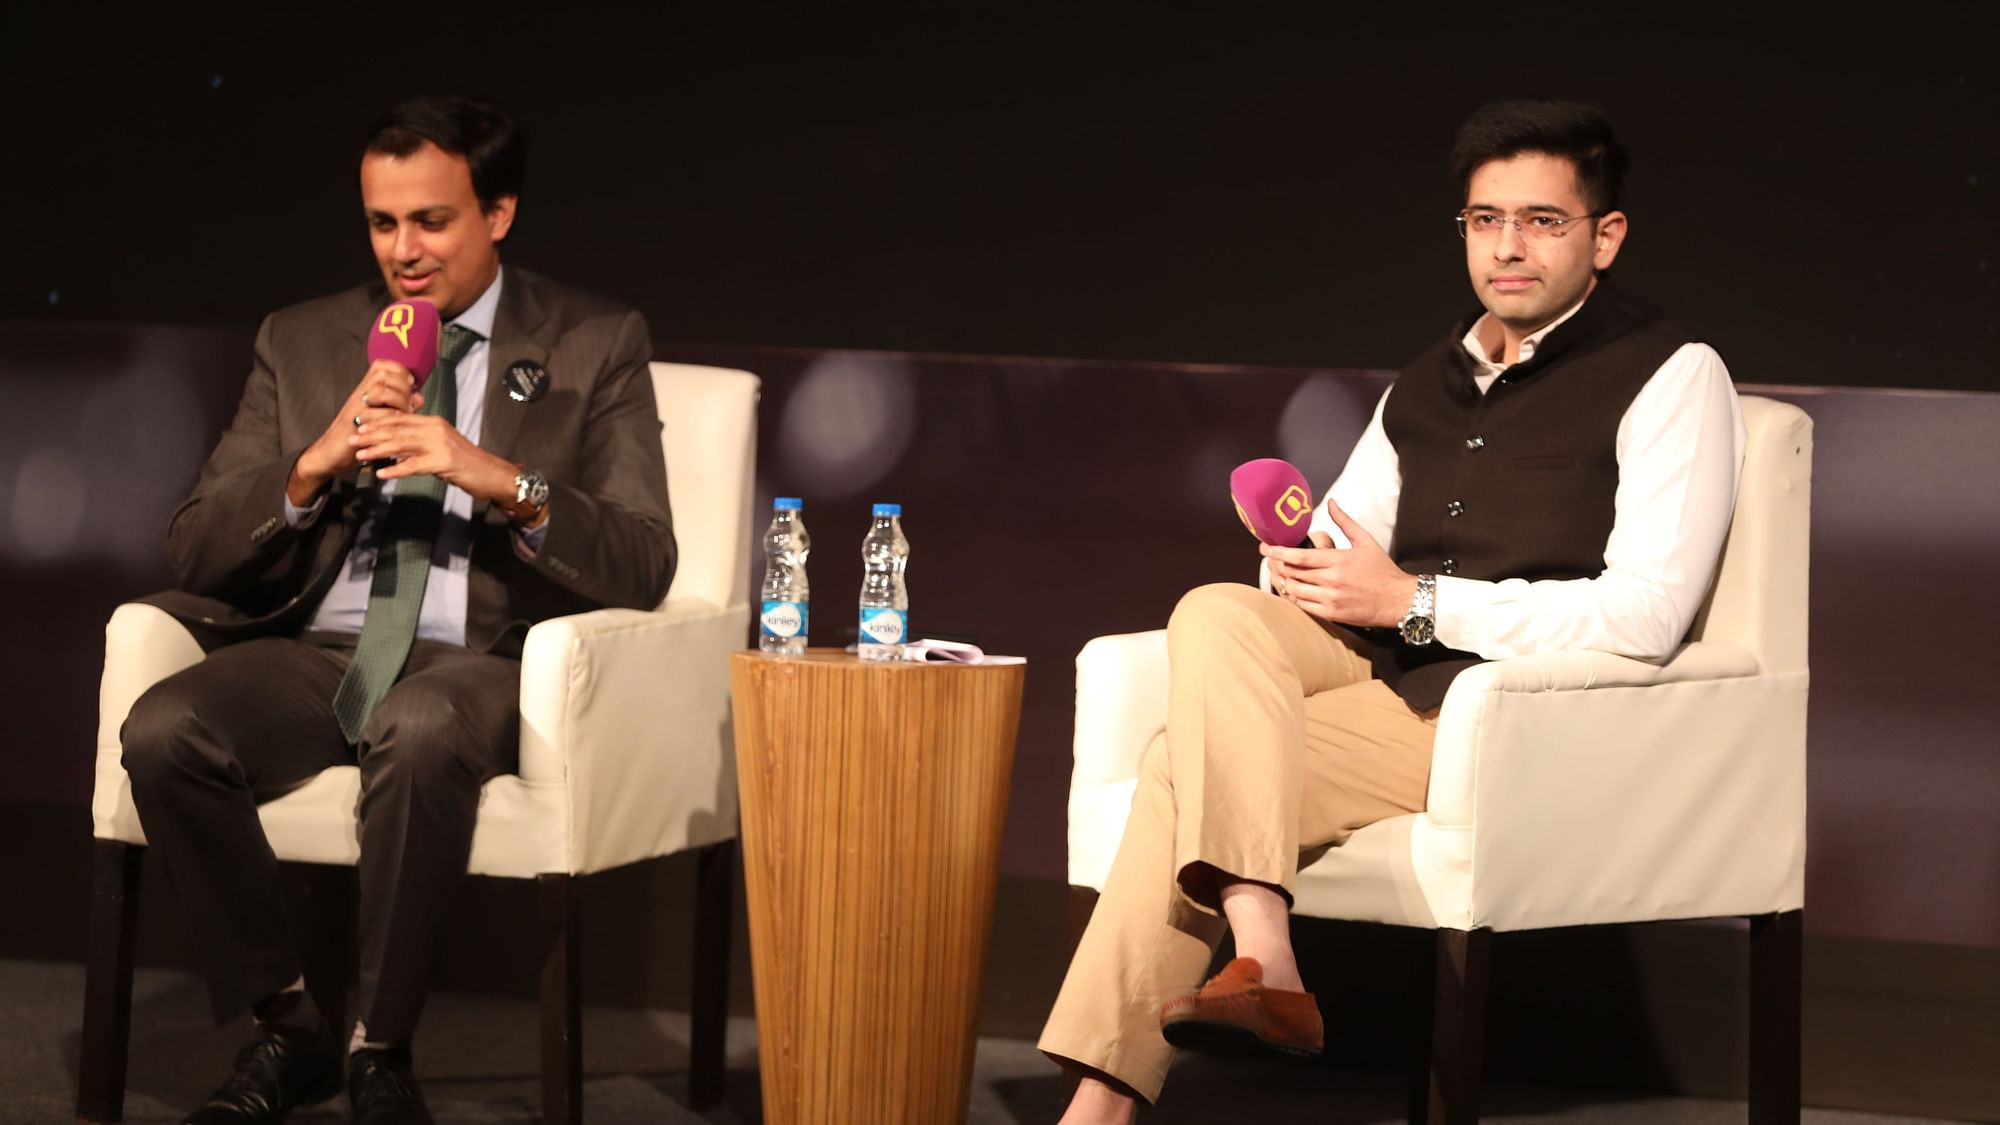 Dinker Vashisht, Head Corporate Affairs: South Asia with Raghav Chadha, National Spokesperson of Aam Aadmi Party during a fire-side chat on Good Samaritans at ‘Safer Roads for Safer Lives’ event on December 3.